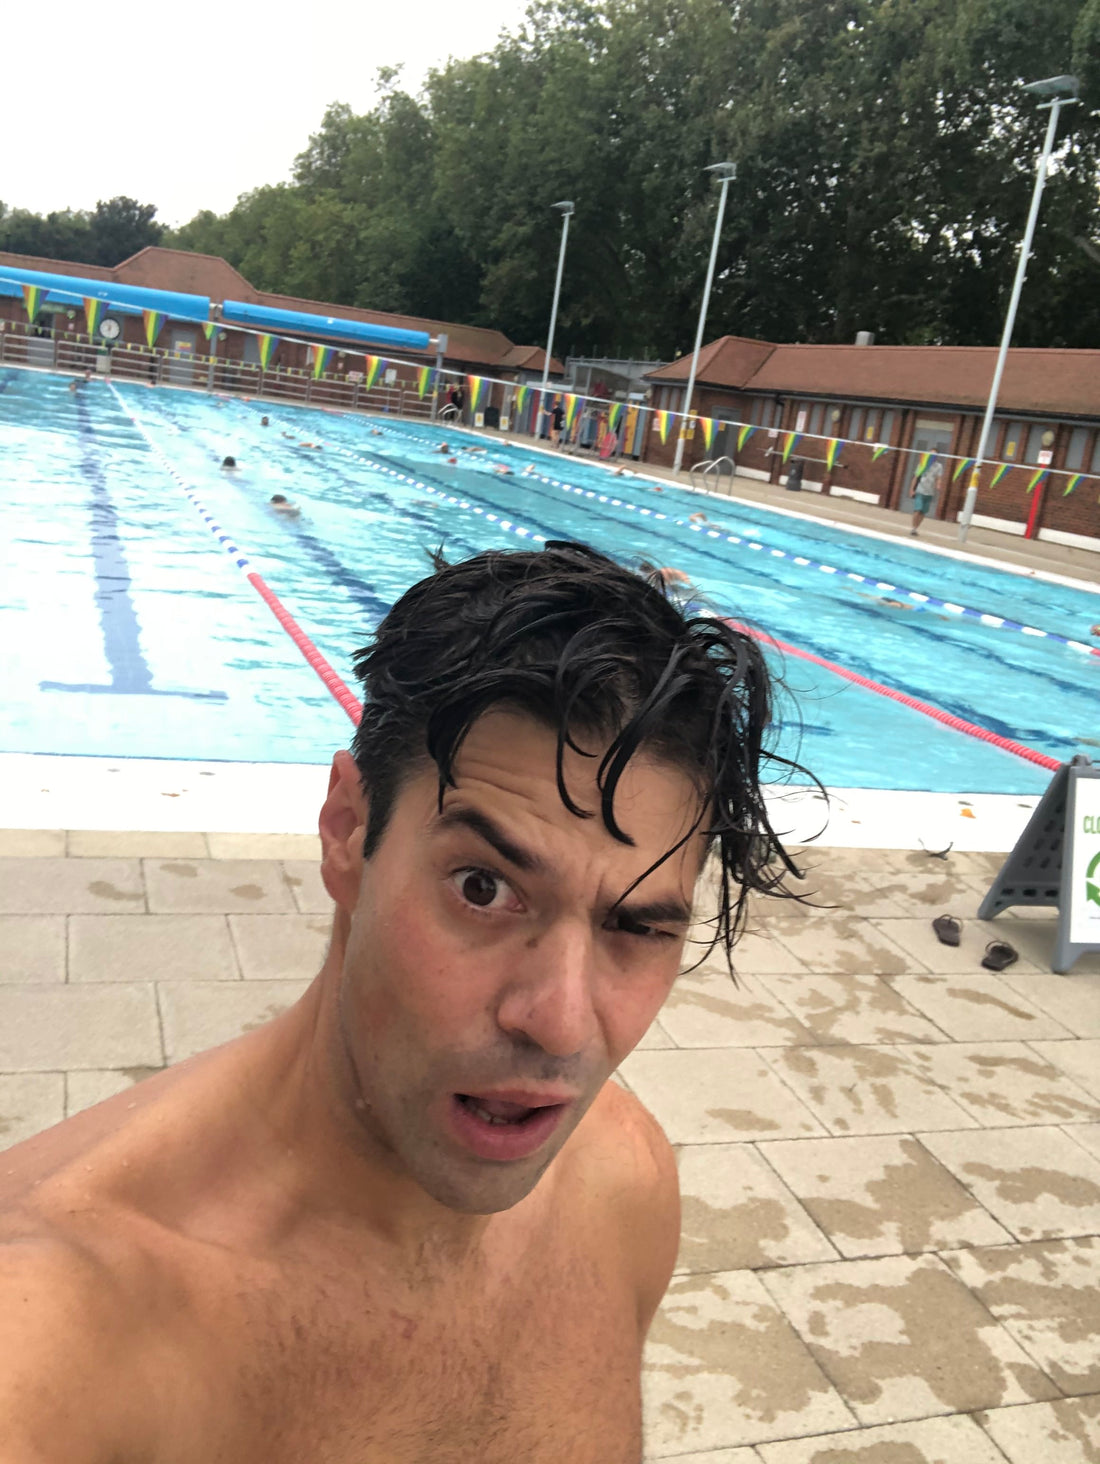 Getting back into the Outdoor Swimming Pools